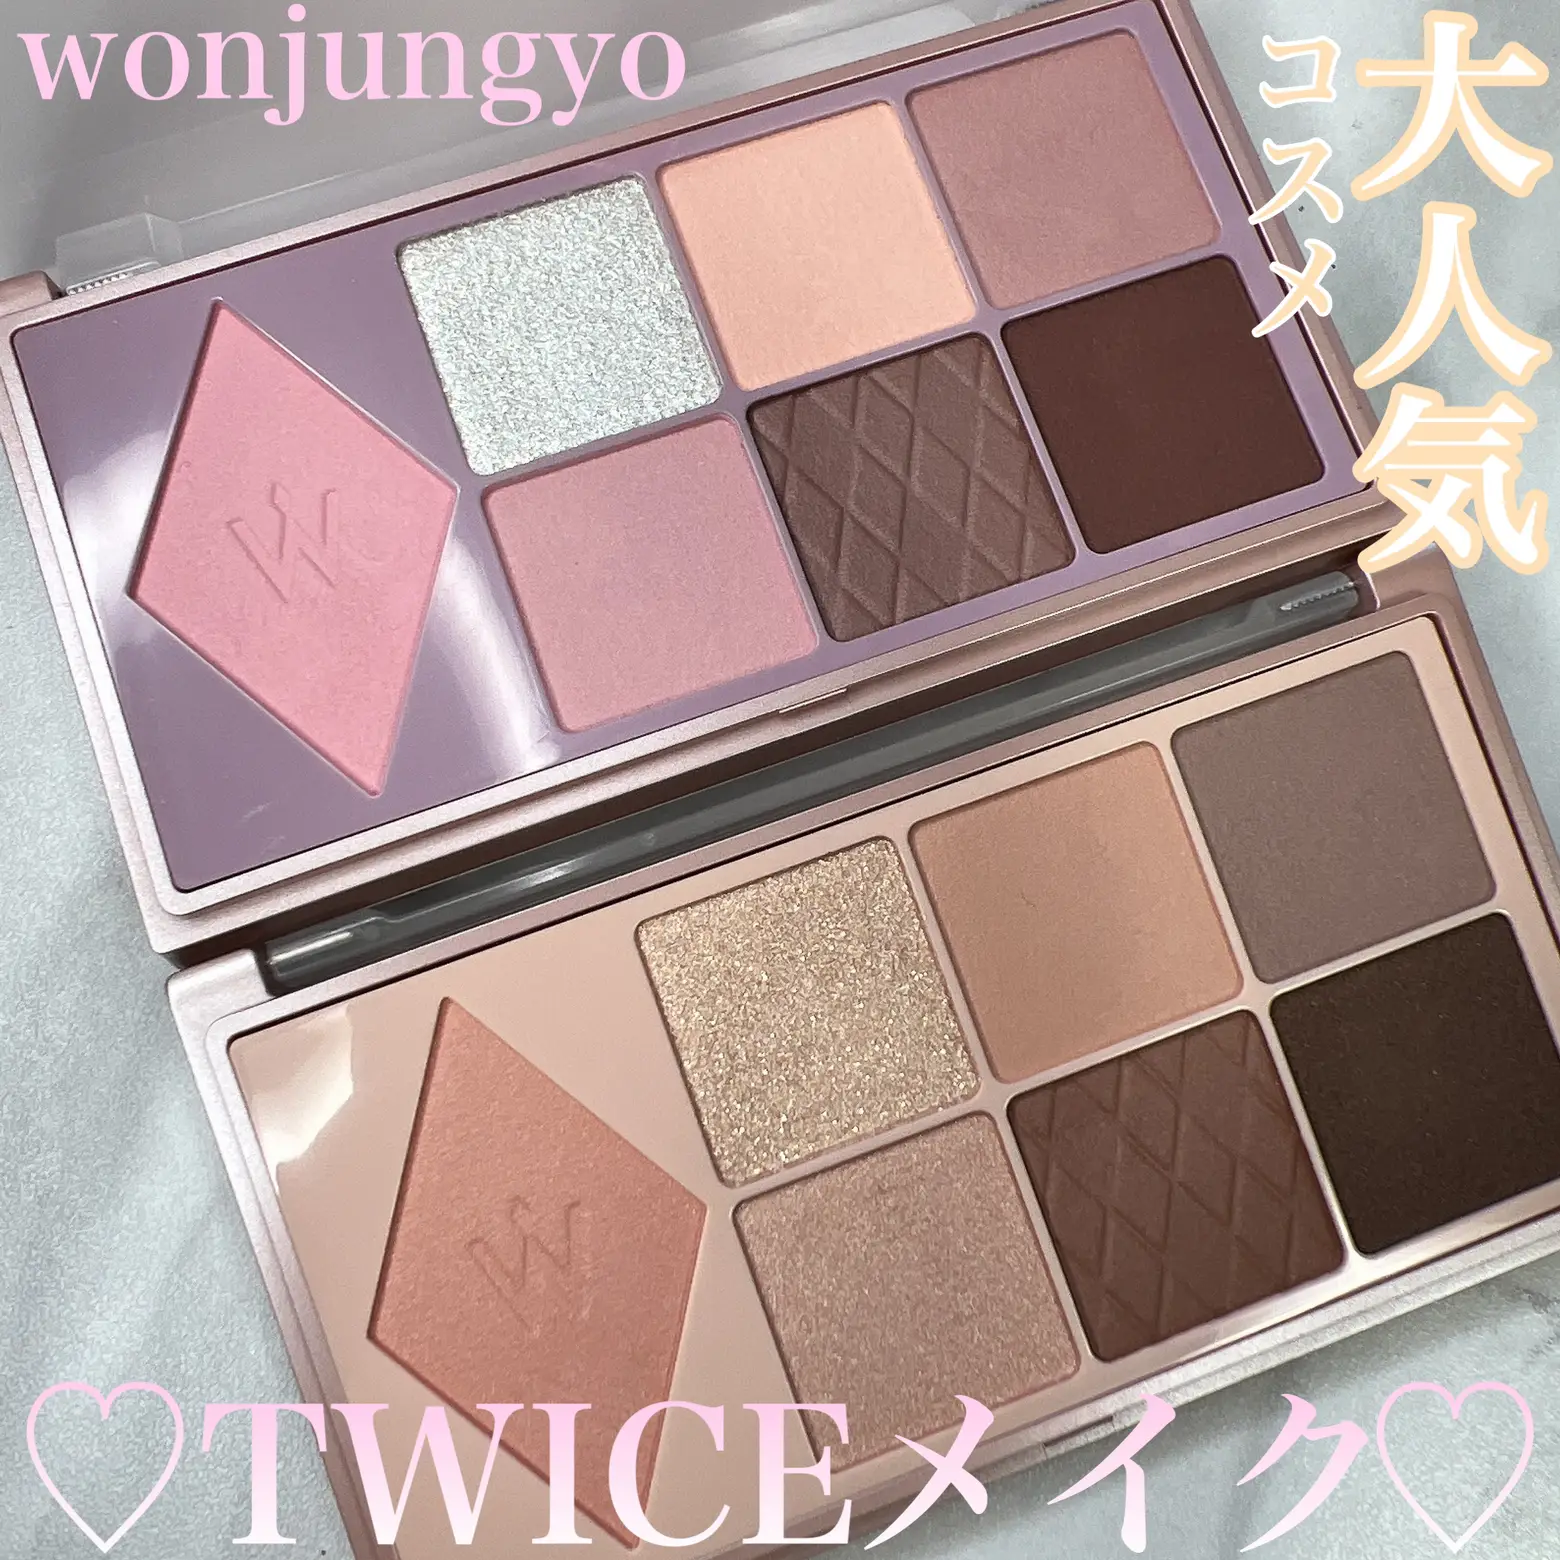 wonjungyo W Daily Mood Up Palette Review✨ | Gallery posted by Ran♡ | Lemon8